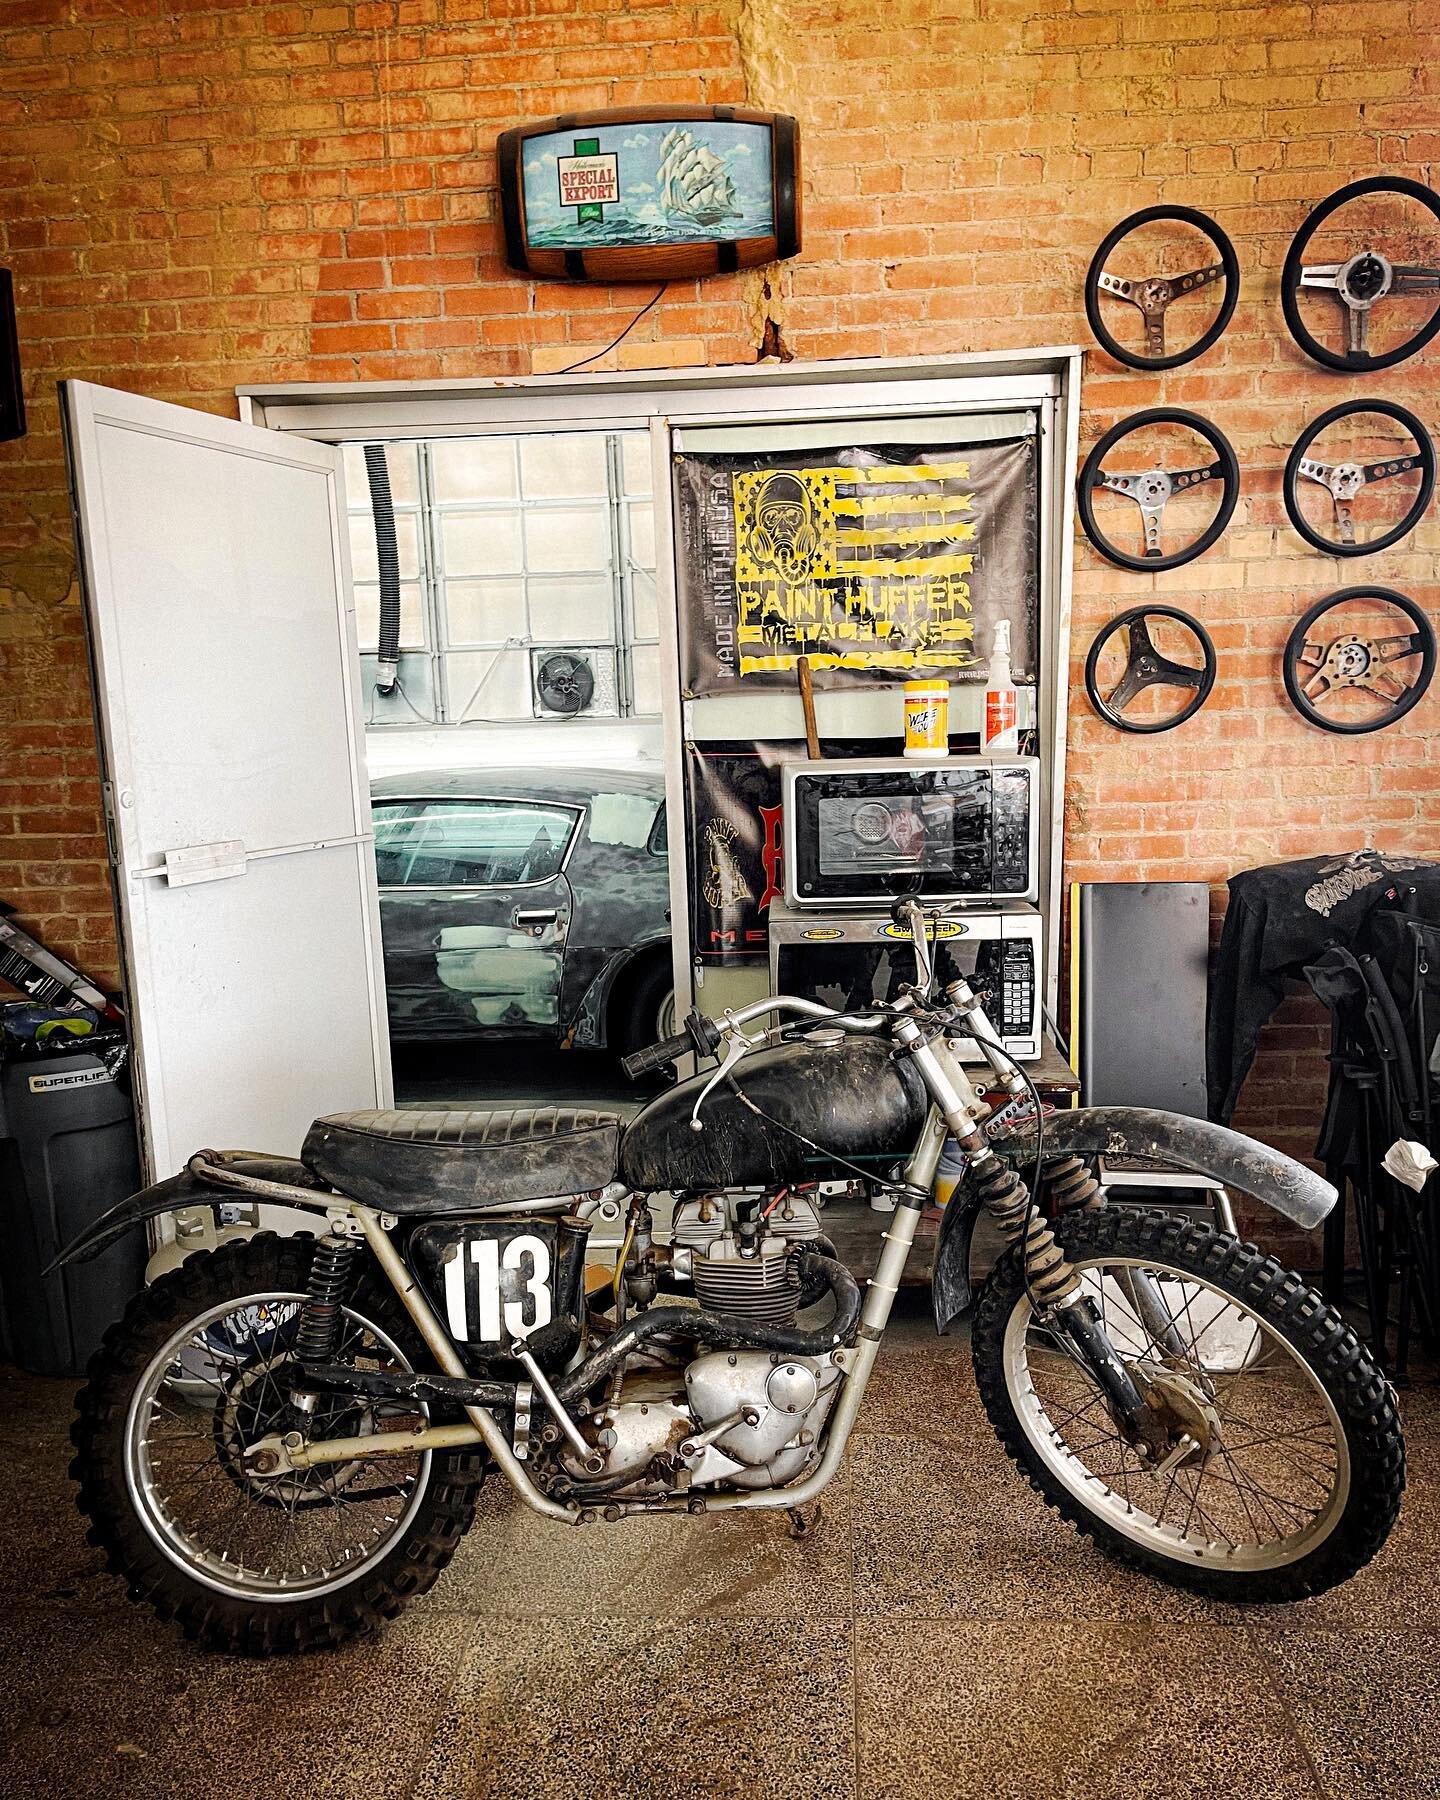 A 1968 @officialtriumph 650 Desert Sled we recently picked in Colorado. It has all the old school desert sled goodies. 👌 

Supposedly, this bike was owned and raced by racer and builder, Jack Hateley. Still trying to find more history on it. Getting